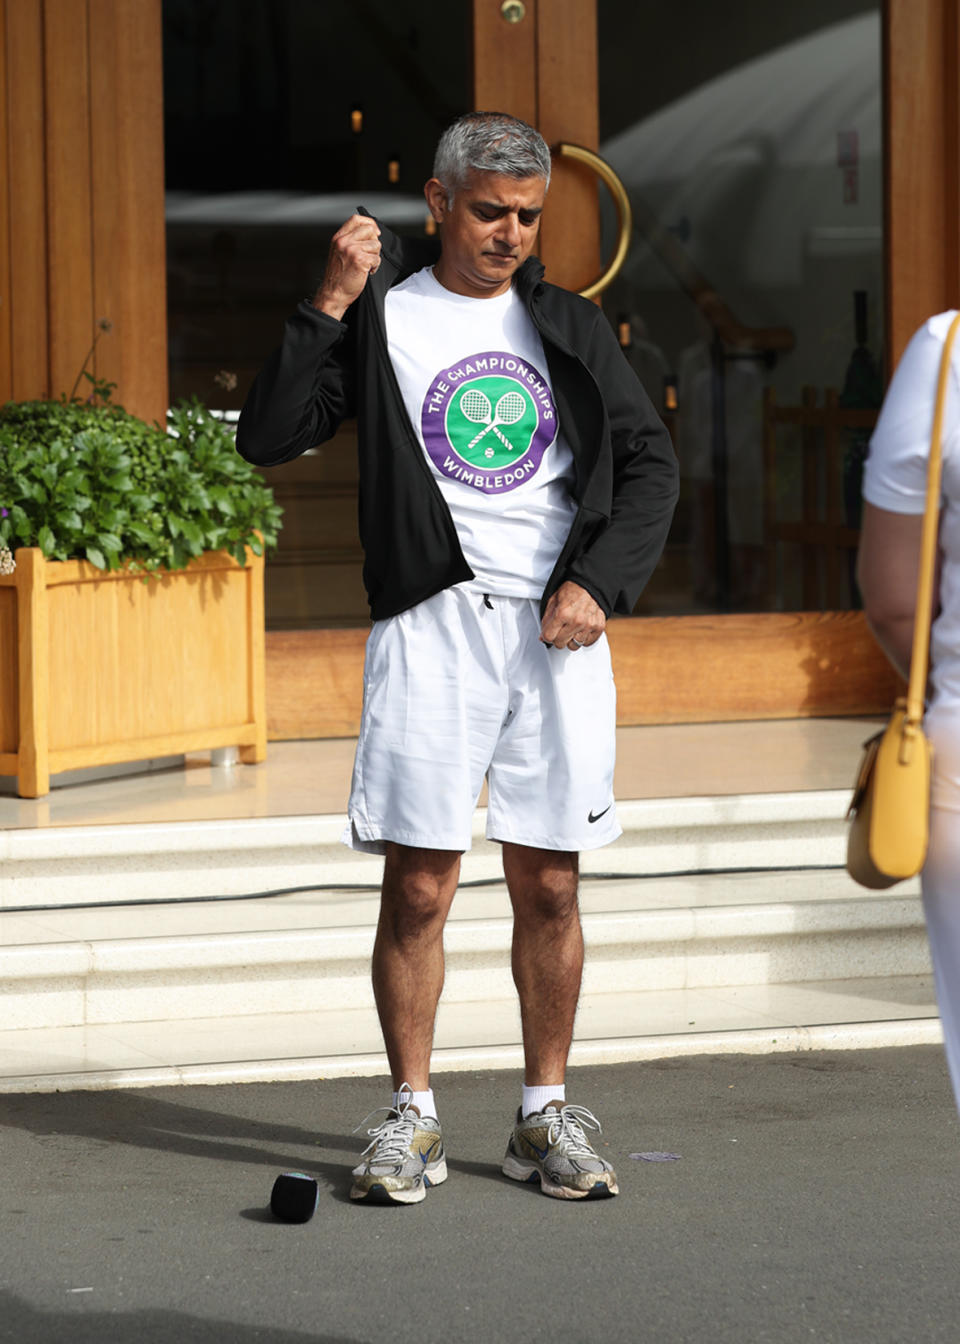 Mayor of London Sadiq Khan prepares to play tennis with key workers at the All England Lawn Tennis Club in Wimbledon, south west London, during an event to thank members of the NHS, TfL and care workers for their service during the coronavirus pandemic.